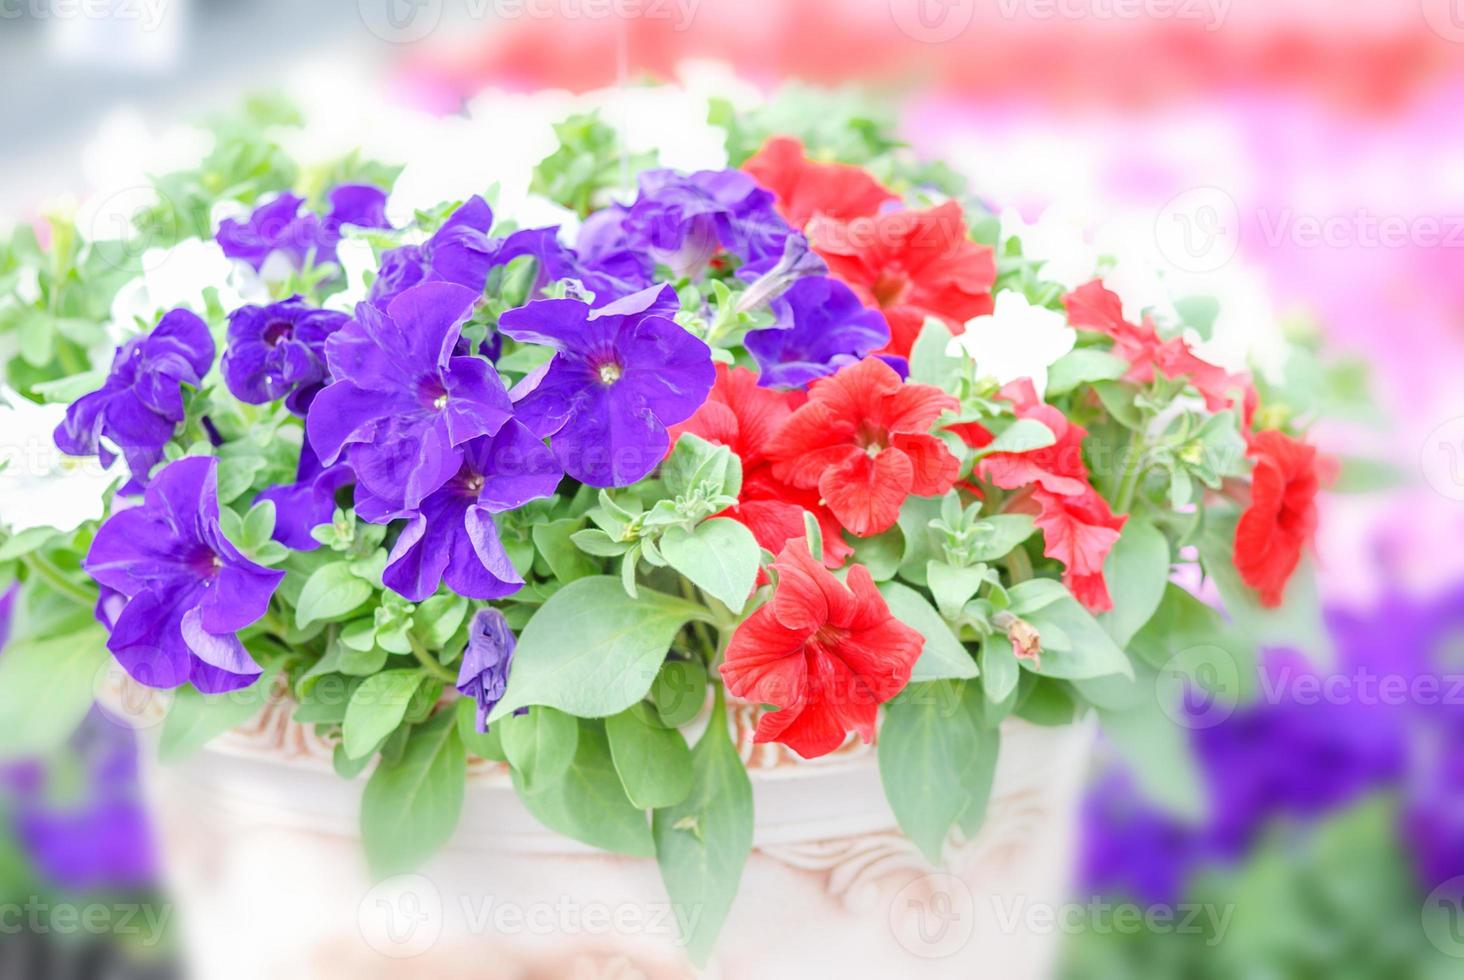 Colorful petunia flowers, Grandiflora is the most popular variety of petunia, with large single or double flowers that form mounds of colorful solid, striped, or variegated blooms. photo